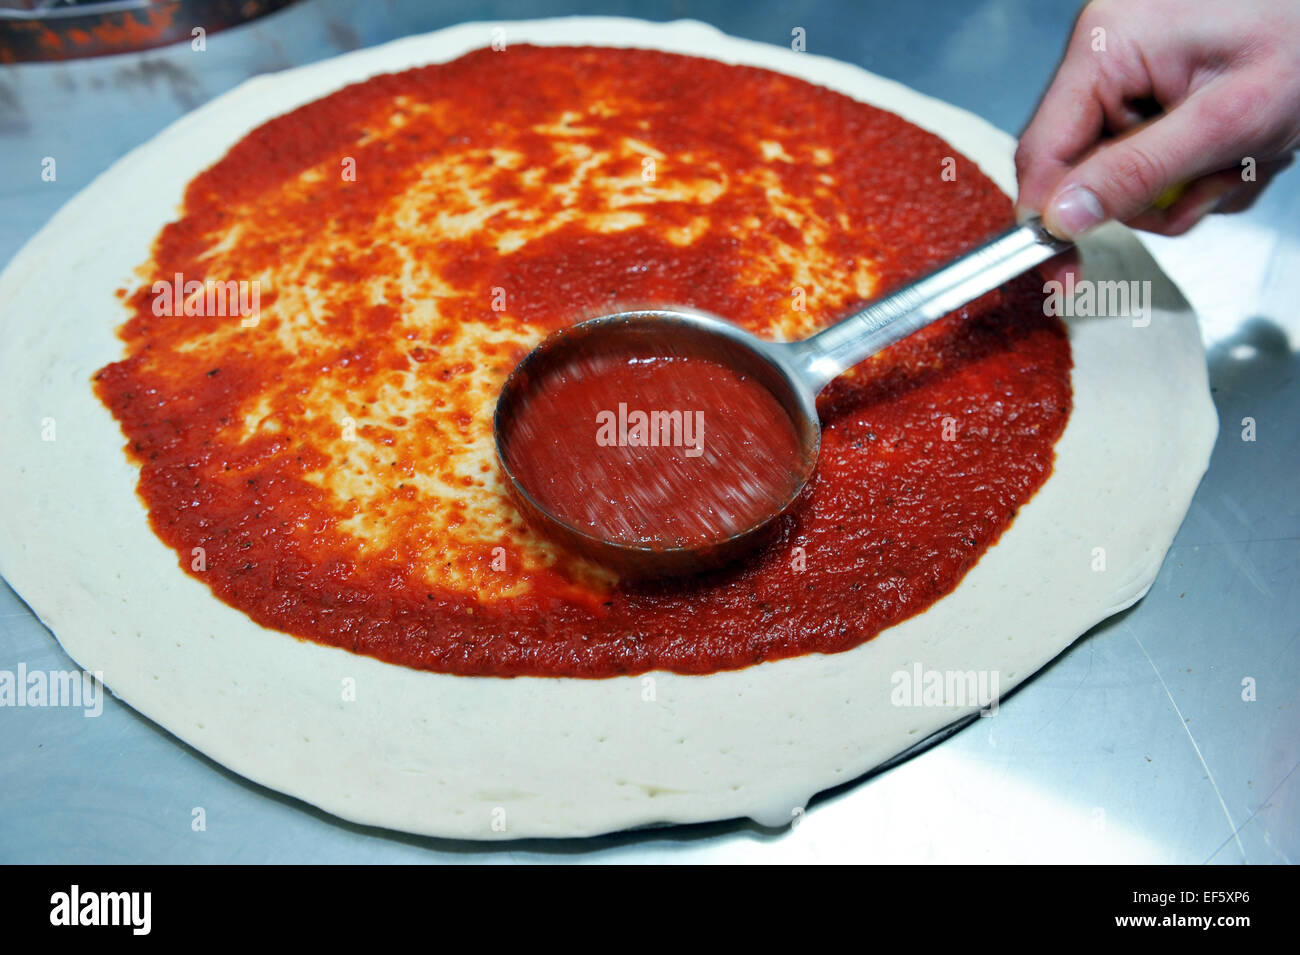 Close up of tomato sauce added to dough to make Pizzas in a takeaway, Leeds Stock Photo